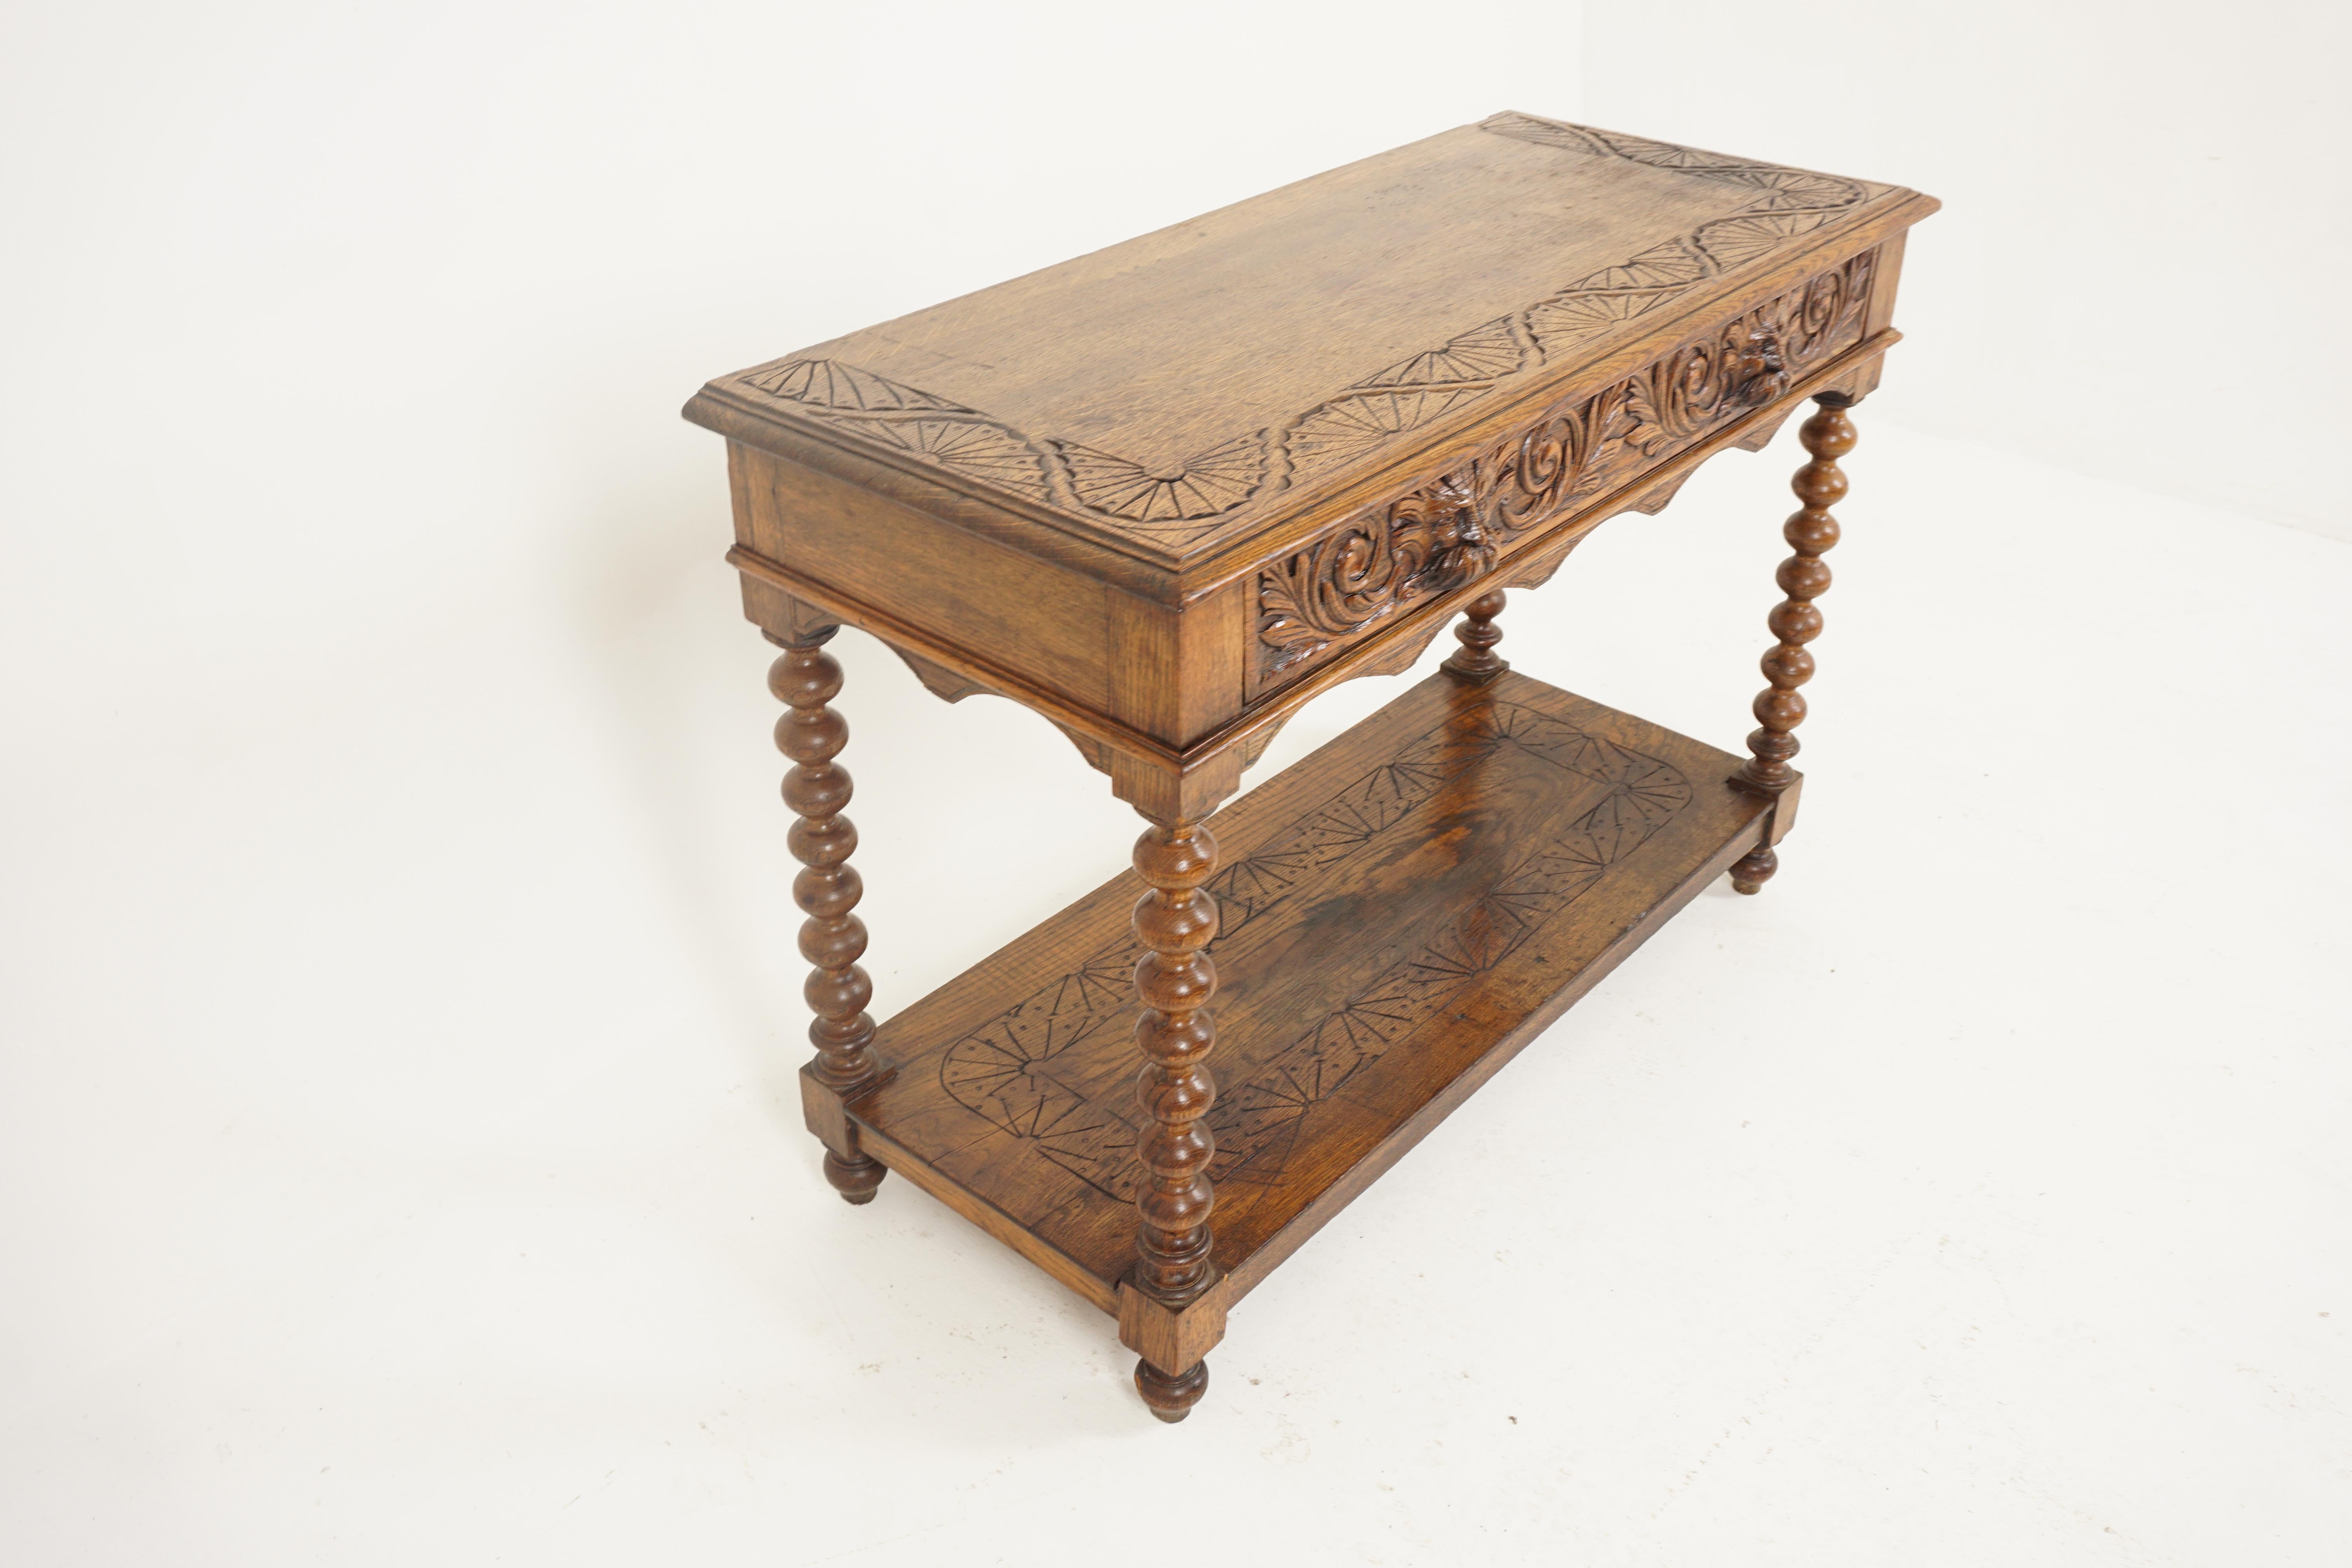 Antique hall table, oak server, green man, Scotland 1880, B2662

Scotland 1880
Solid oak
Original finish
Rectangular moulded top 
Pair of carved drawers with green handles 
Raised on bobbin legs with under tier shelf below
Nice color 
Some